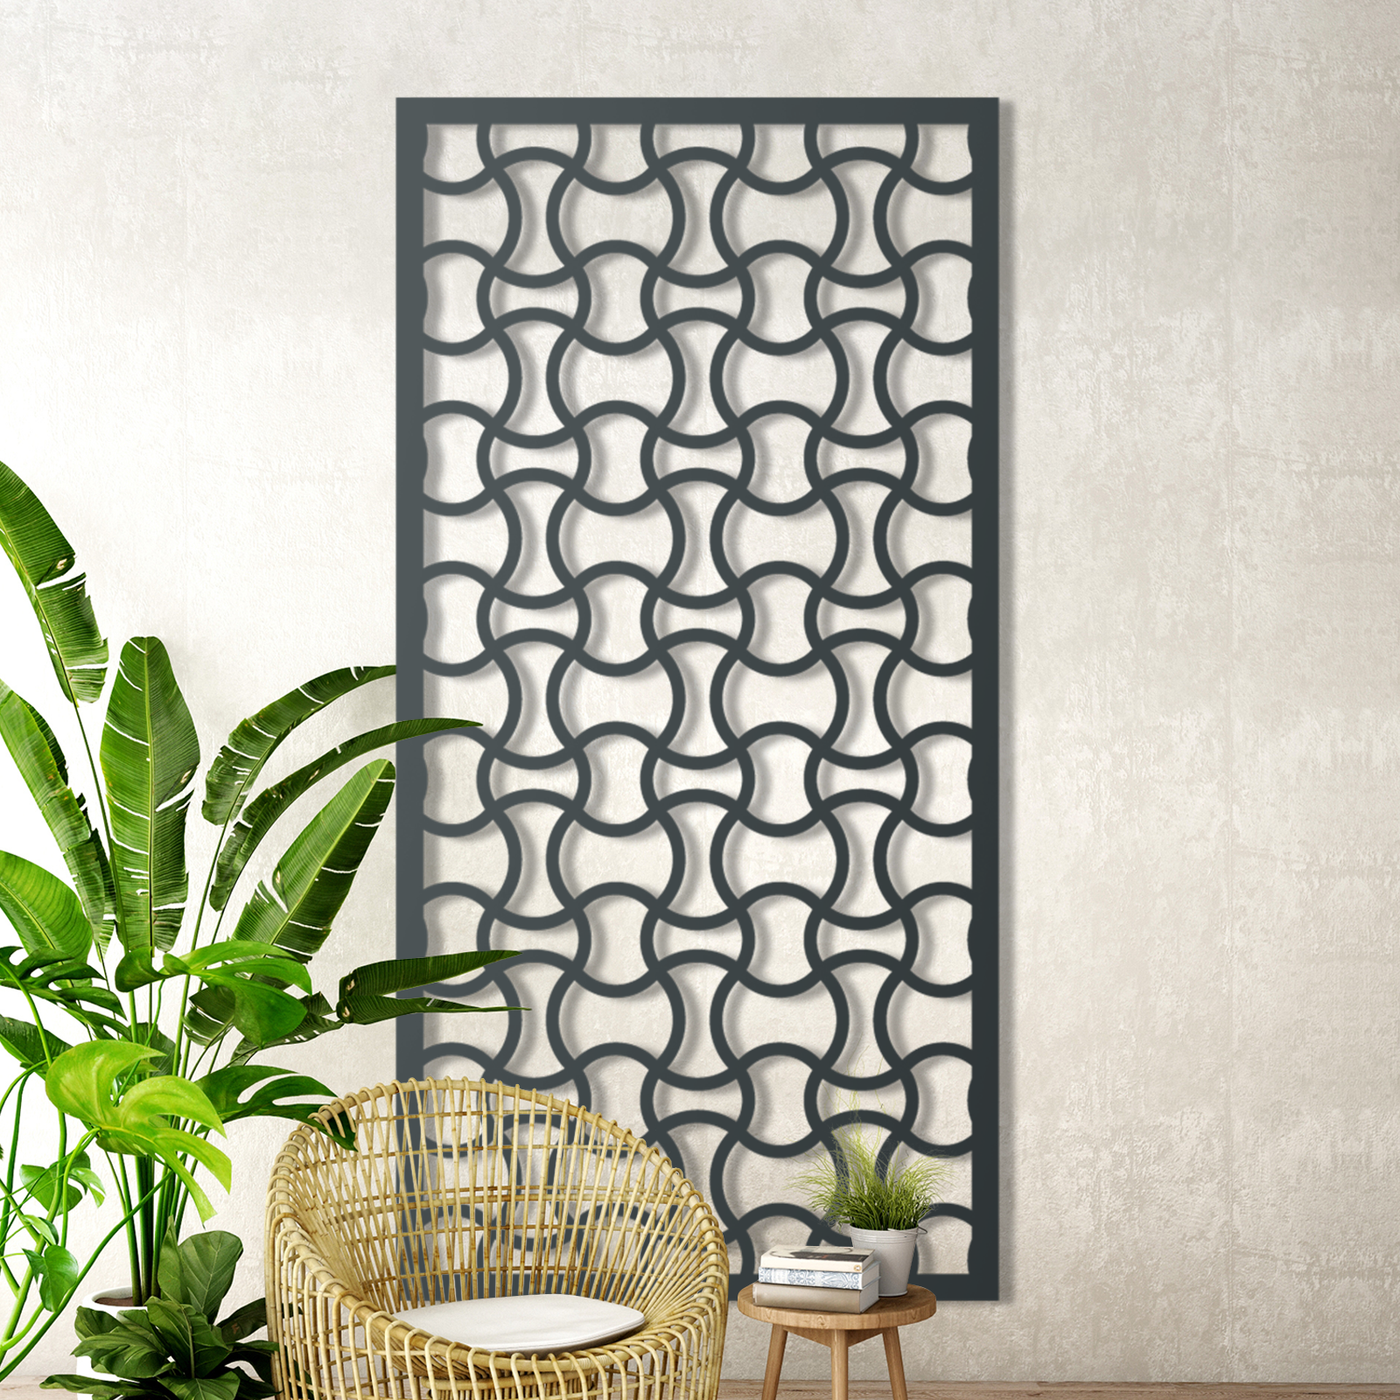 Cross Stitch Metal Screen: A Durable Solution for Garden Privacy